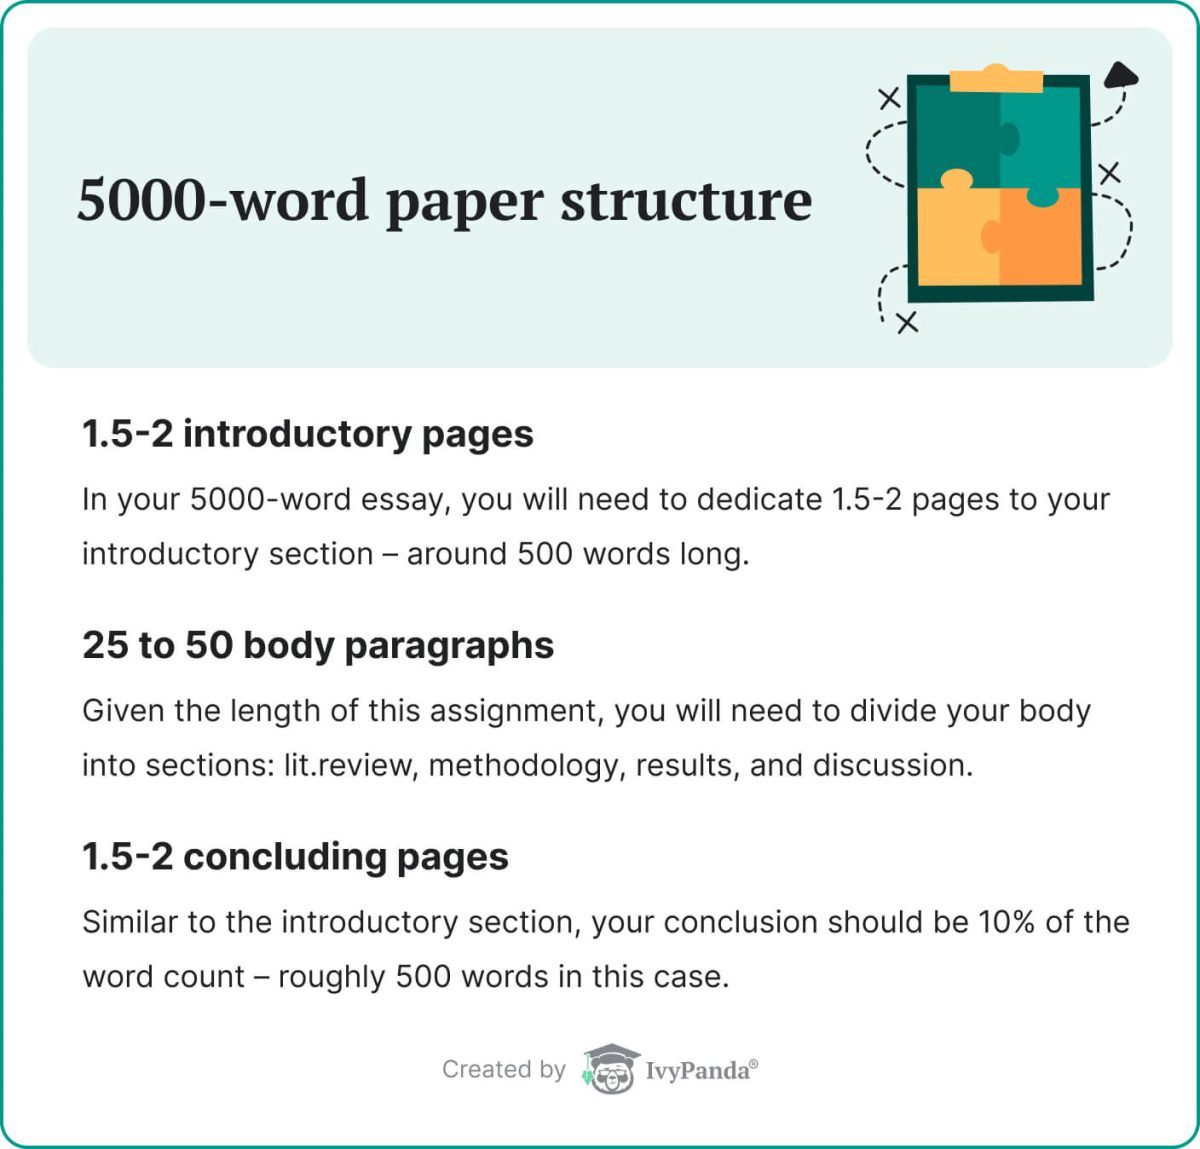 The picture describes a 5000-word paper structure.